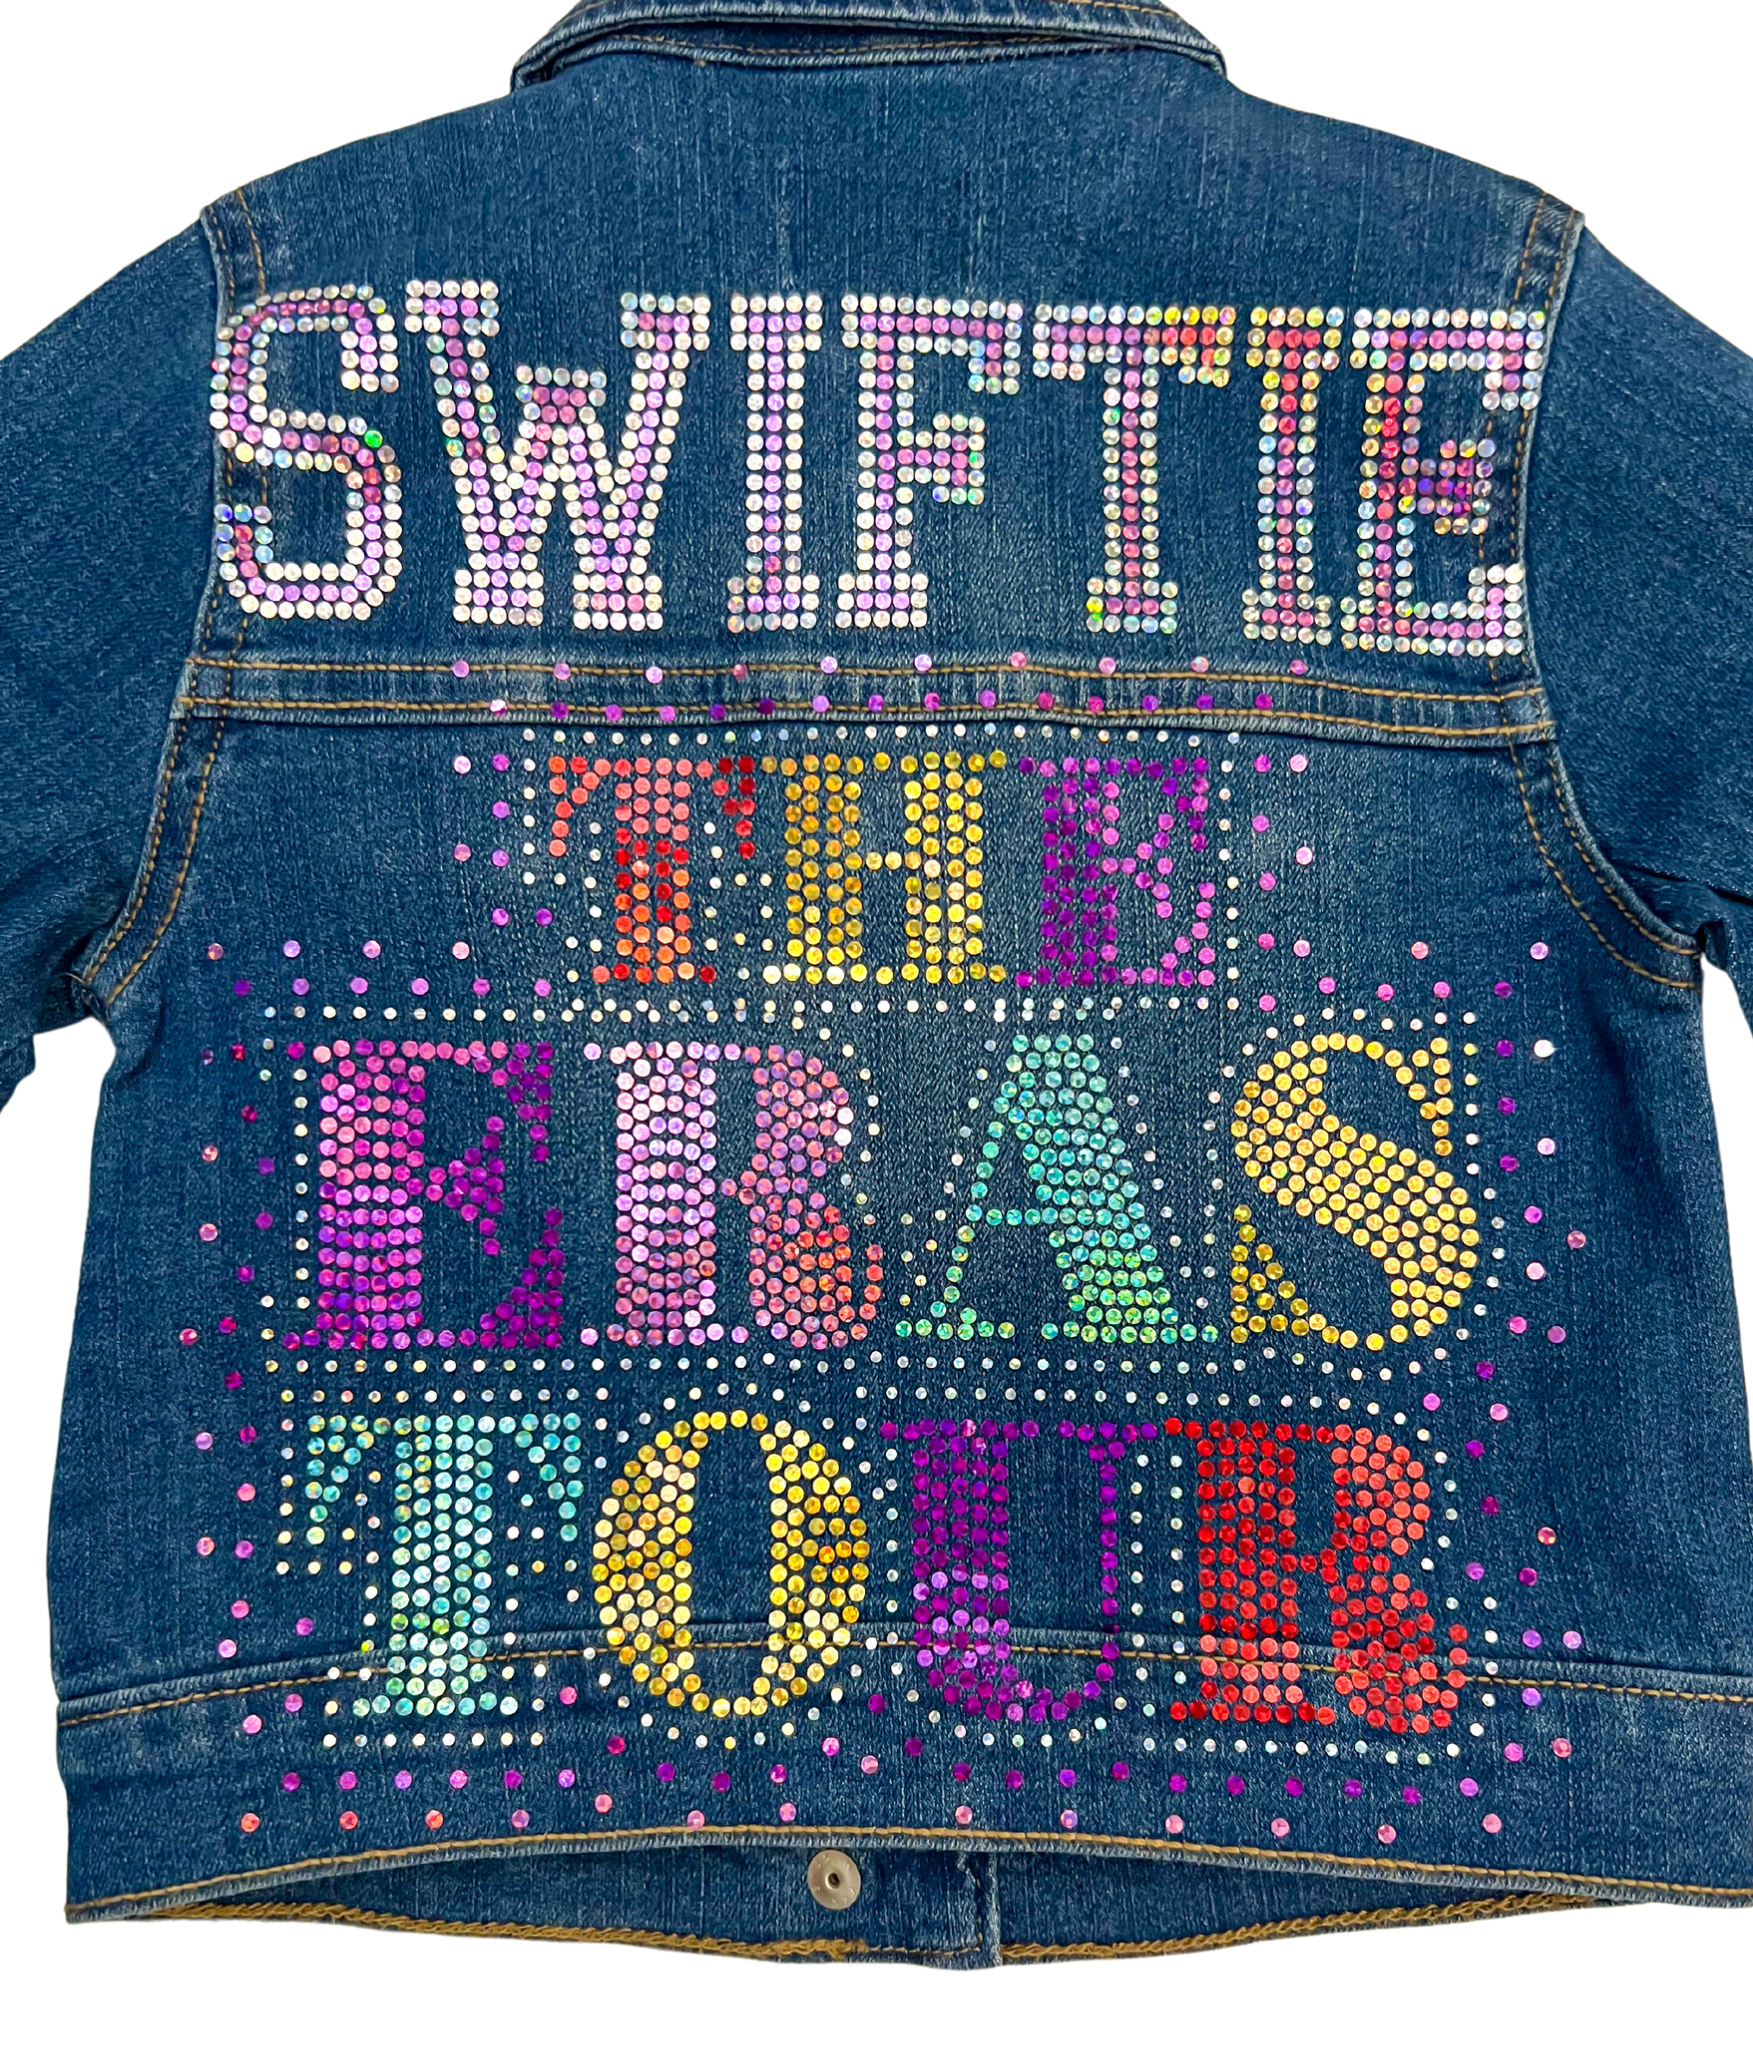 “long live all the mountains we moved” Taylor Swift Eras Tour jacket |  one-of-a-kind handmade quilted denim jacket